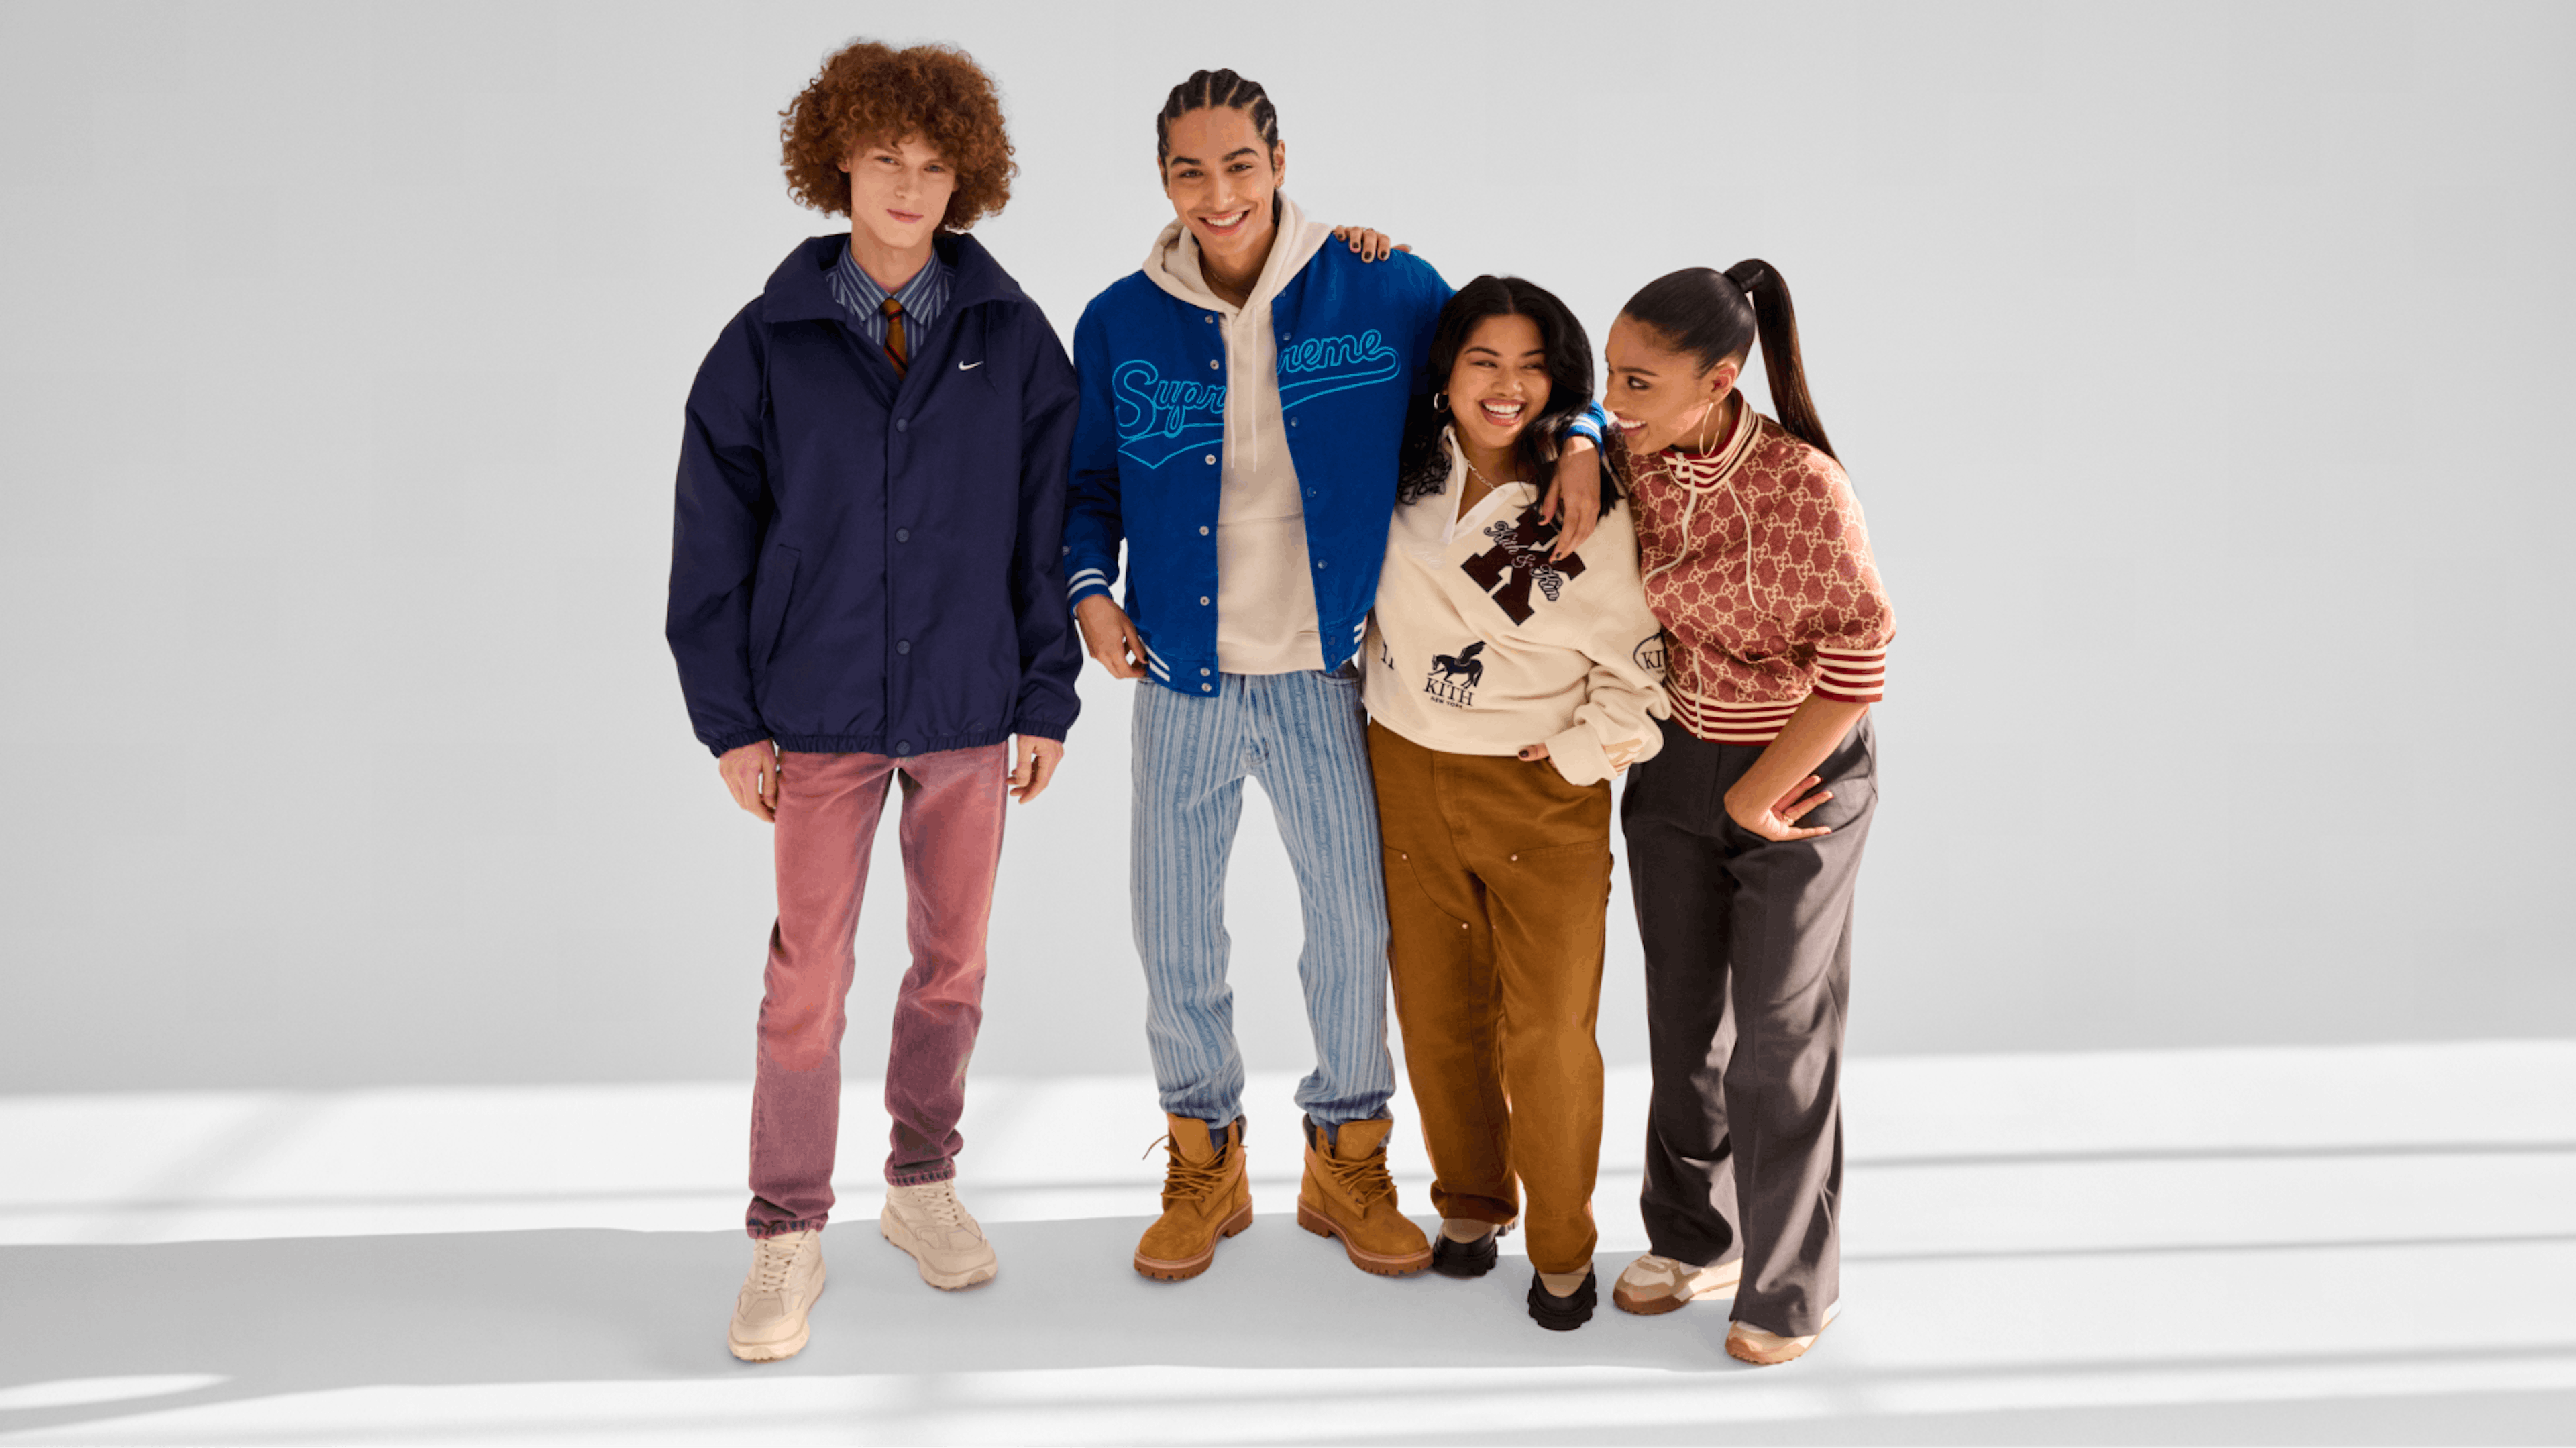 The image shows four young individuals dressed in a mix of athleisure and streetwear styles. A description of the looks: On the left, we see a dark blue jacket over a striped collared shirt, pinkish-red faded trousers, and beige sneakers. On the second Left: Blue varsity jacket with "Supreme," light-colored hoodie, light blue striped jeans, and tan Timberland-style boots. On the second right, we see a cream sweatshirt with "KITH" and graphic print, mustard brown cargo pants, and black shoes. And lastly, on the far right we see a Burgundy patterned zip-up top, dark gray flared trousers, and beige sneakers.